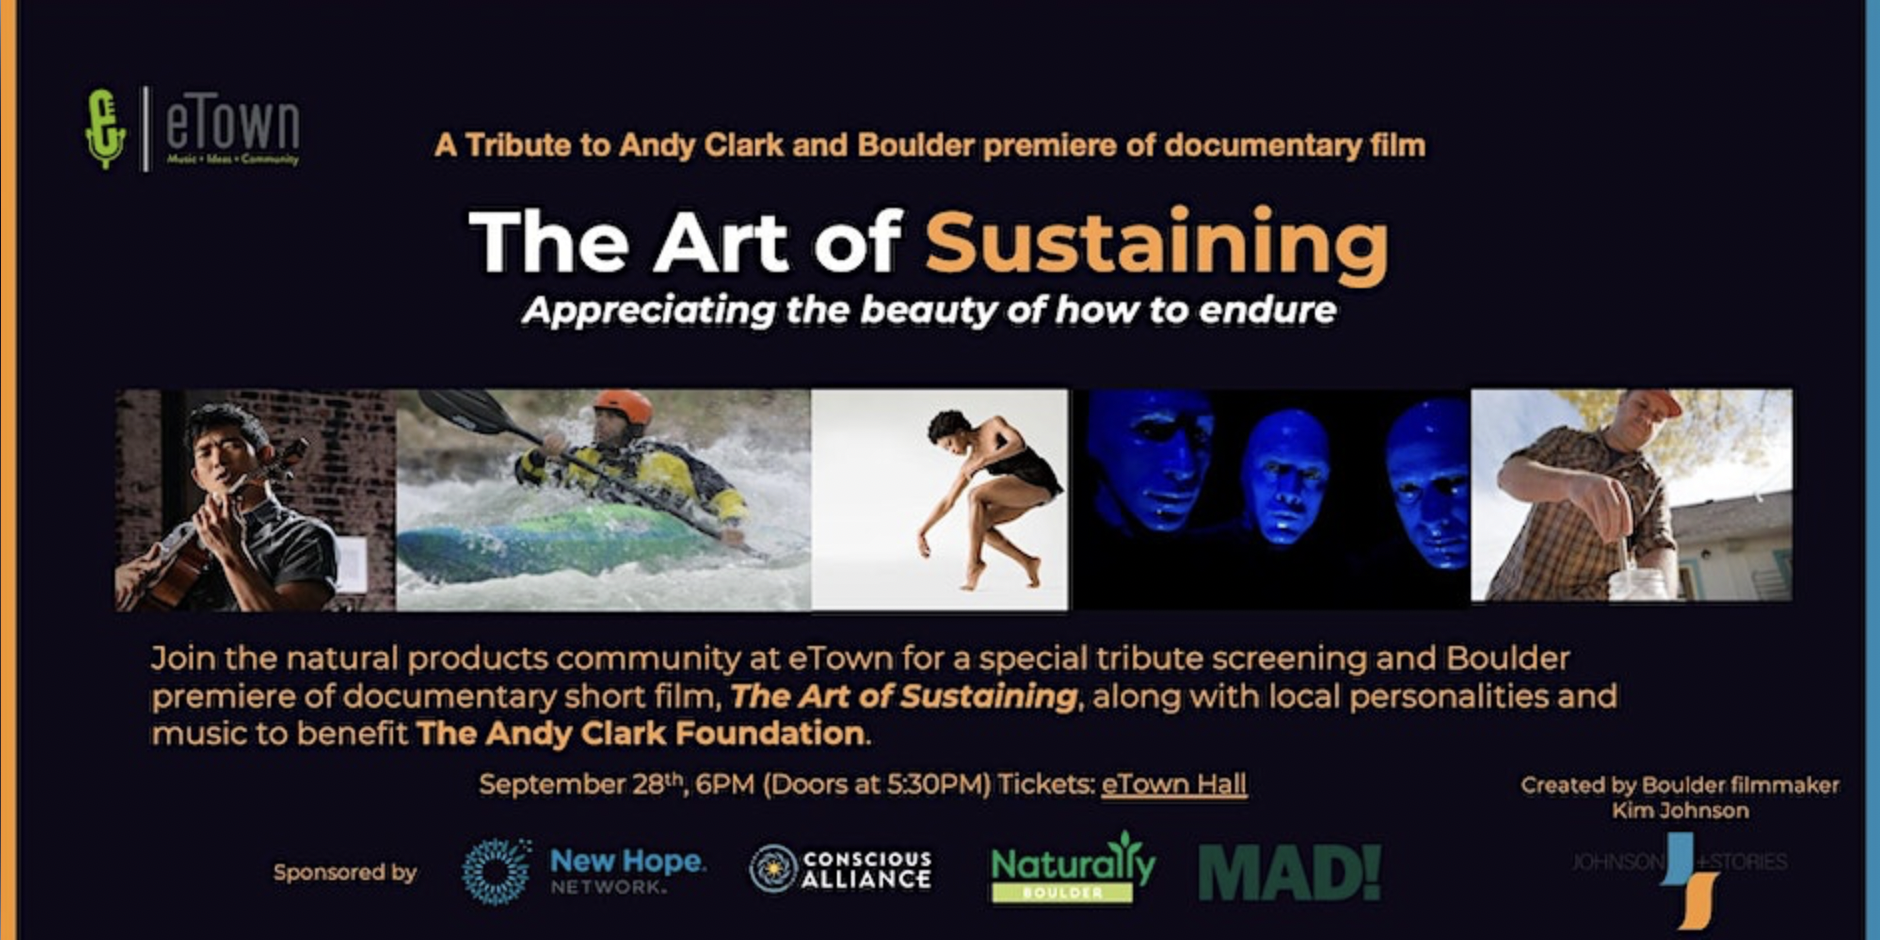 Andy Clark Foundation Fundraiser and The Art of Sustaining Film Screening